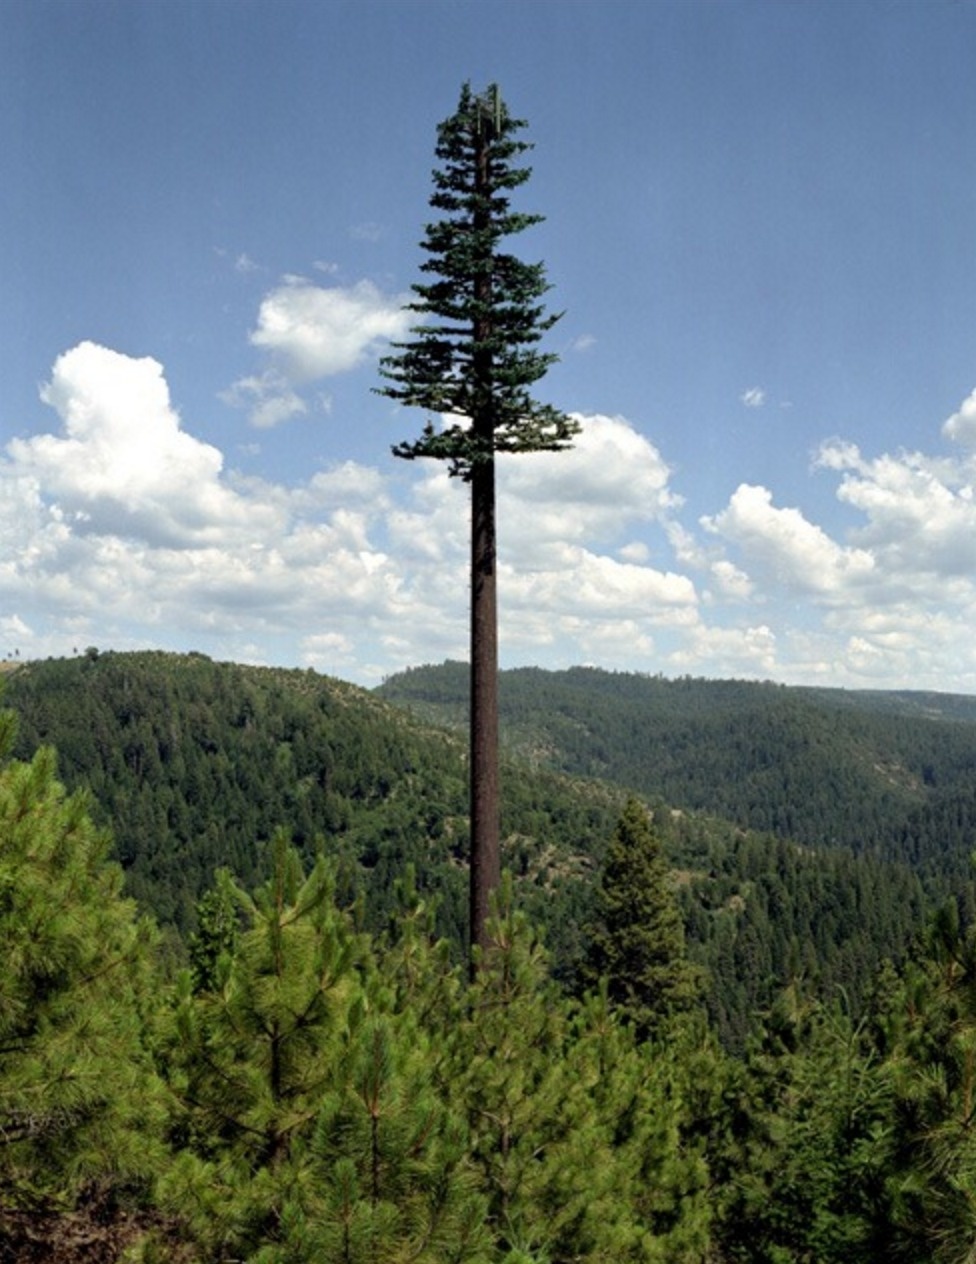 The overgrown, gigantic tree is actually a disguised cellphone tower. 